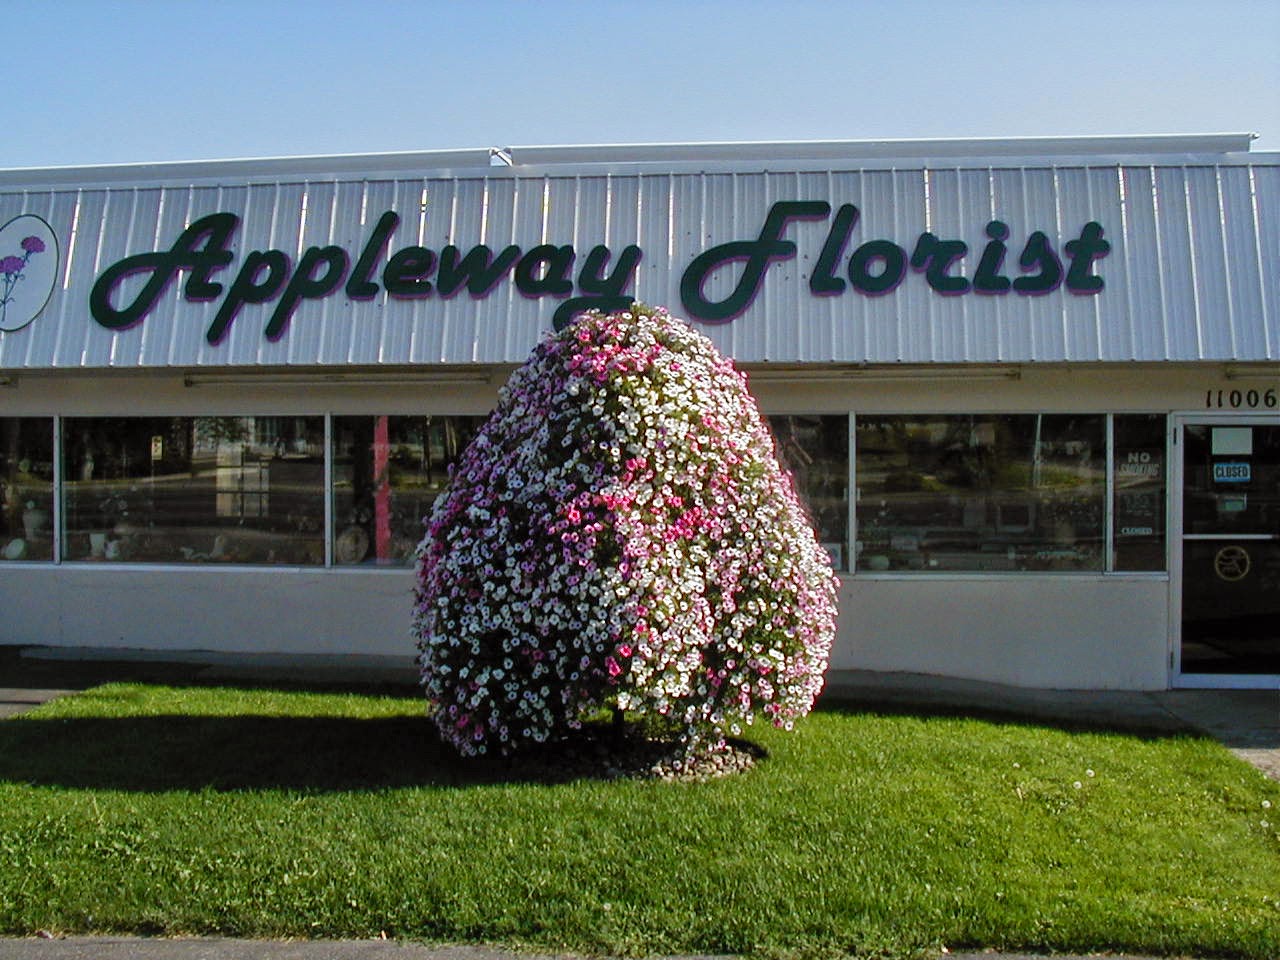 Appleway Florist & Greenhouse & Flower Delivery